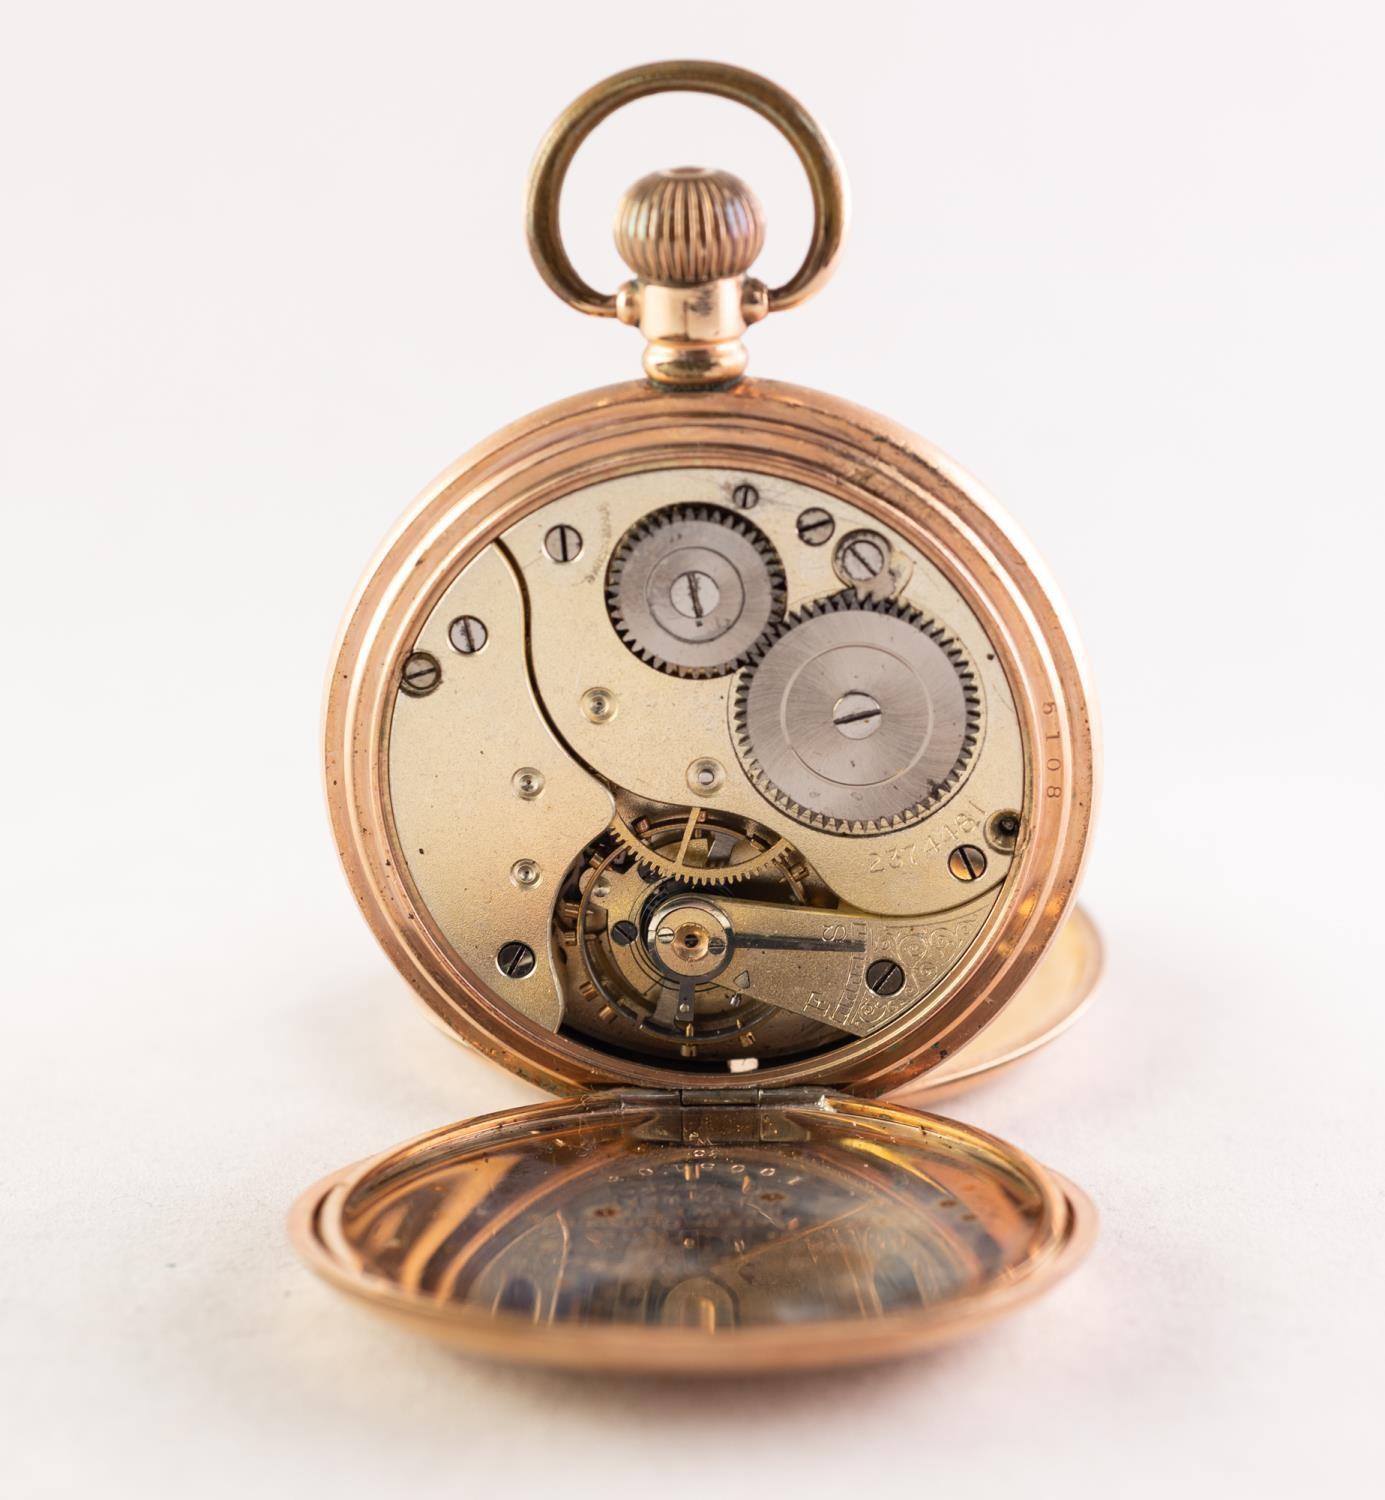 MORATH BROTHERS, LIVERPOOL, ROLLED GOLD FULL HUNTER POCKET WATCH with keyless Swiss movement, - Image 2 of 3